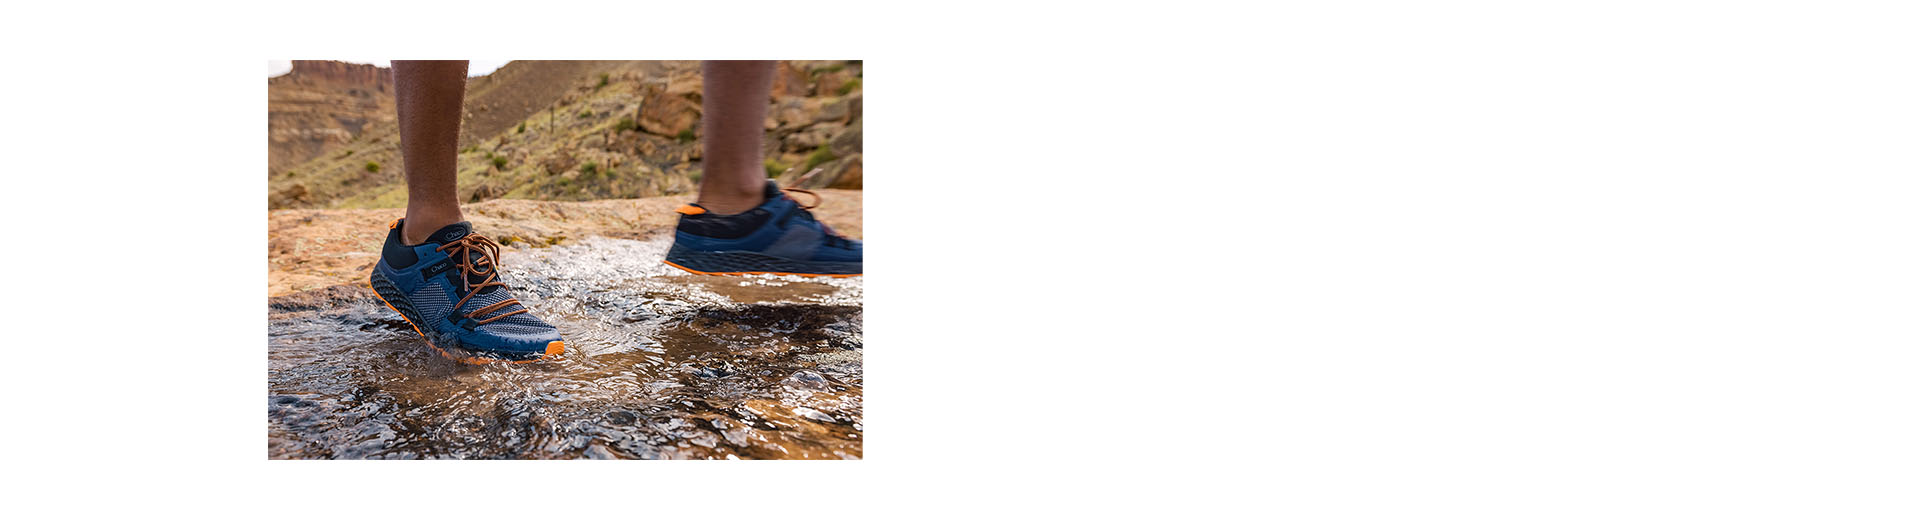 Chaco Canyonland sneakers outside stepping through a puddle.